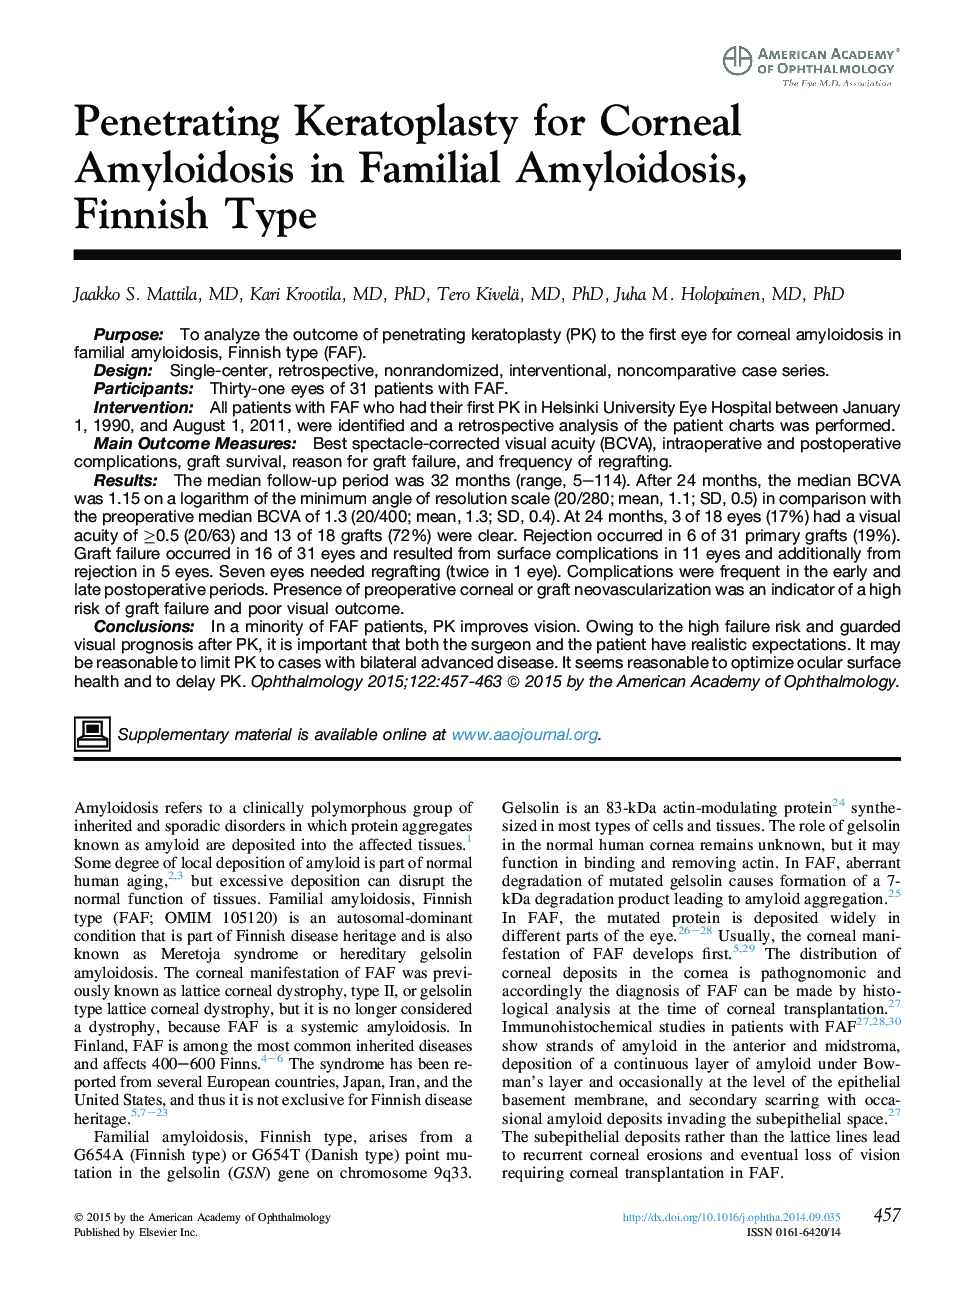 Penetrating Keratoplasty for Corneal Amyloidosis in Familial Amyloidosis, FinnishÂ Type